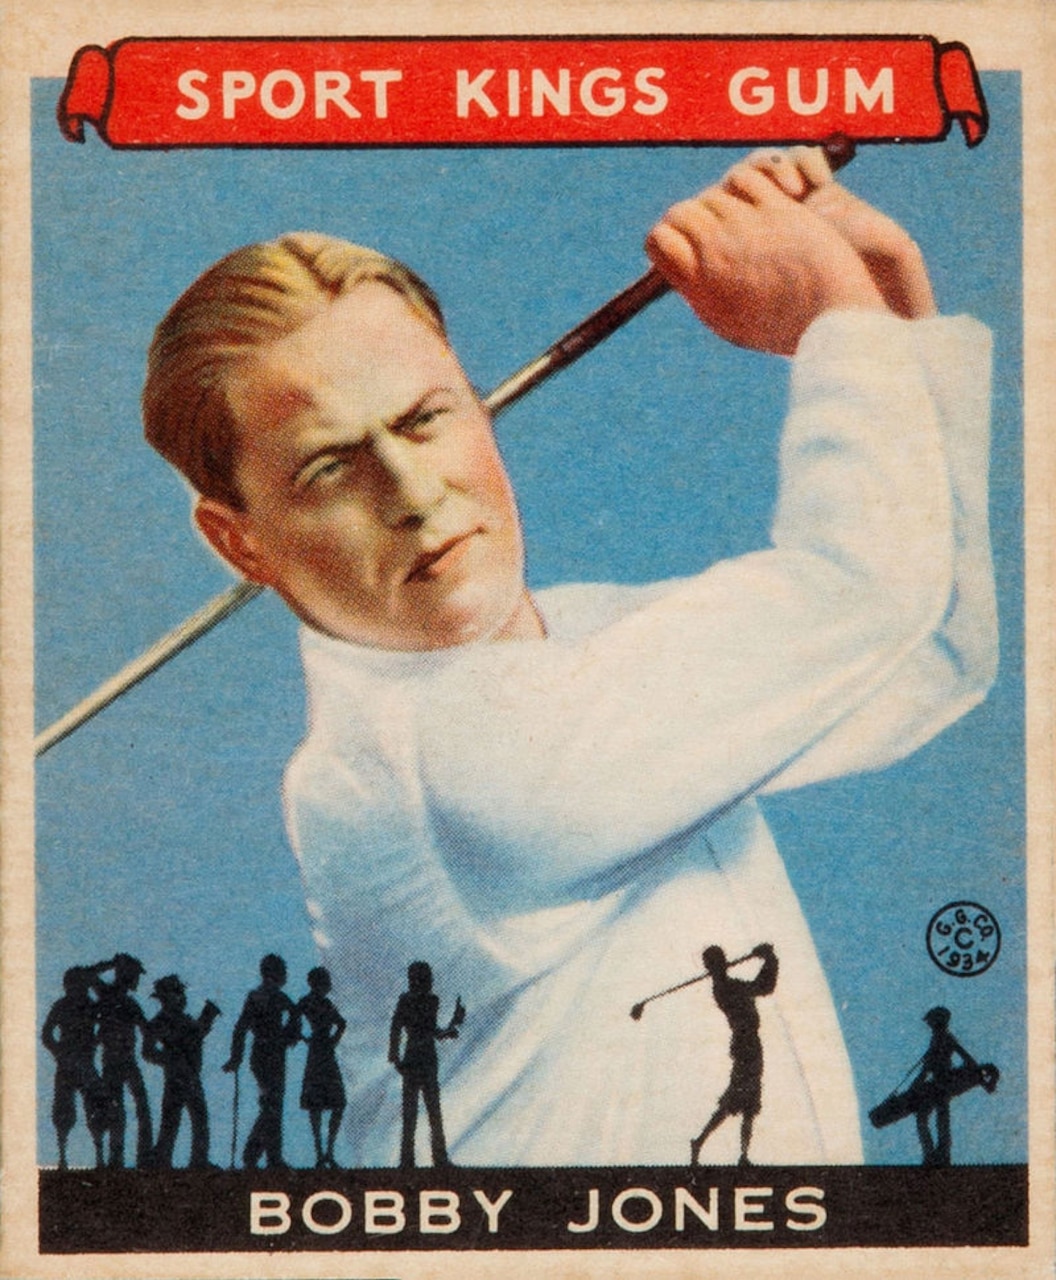 A color graphic shows the upper torso of a man swinging a golf club.